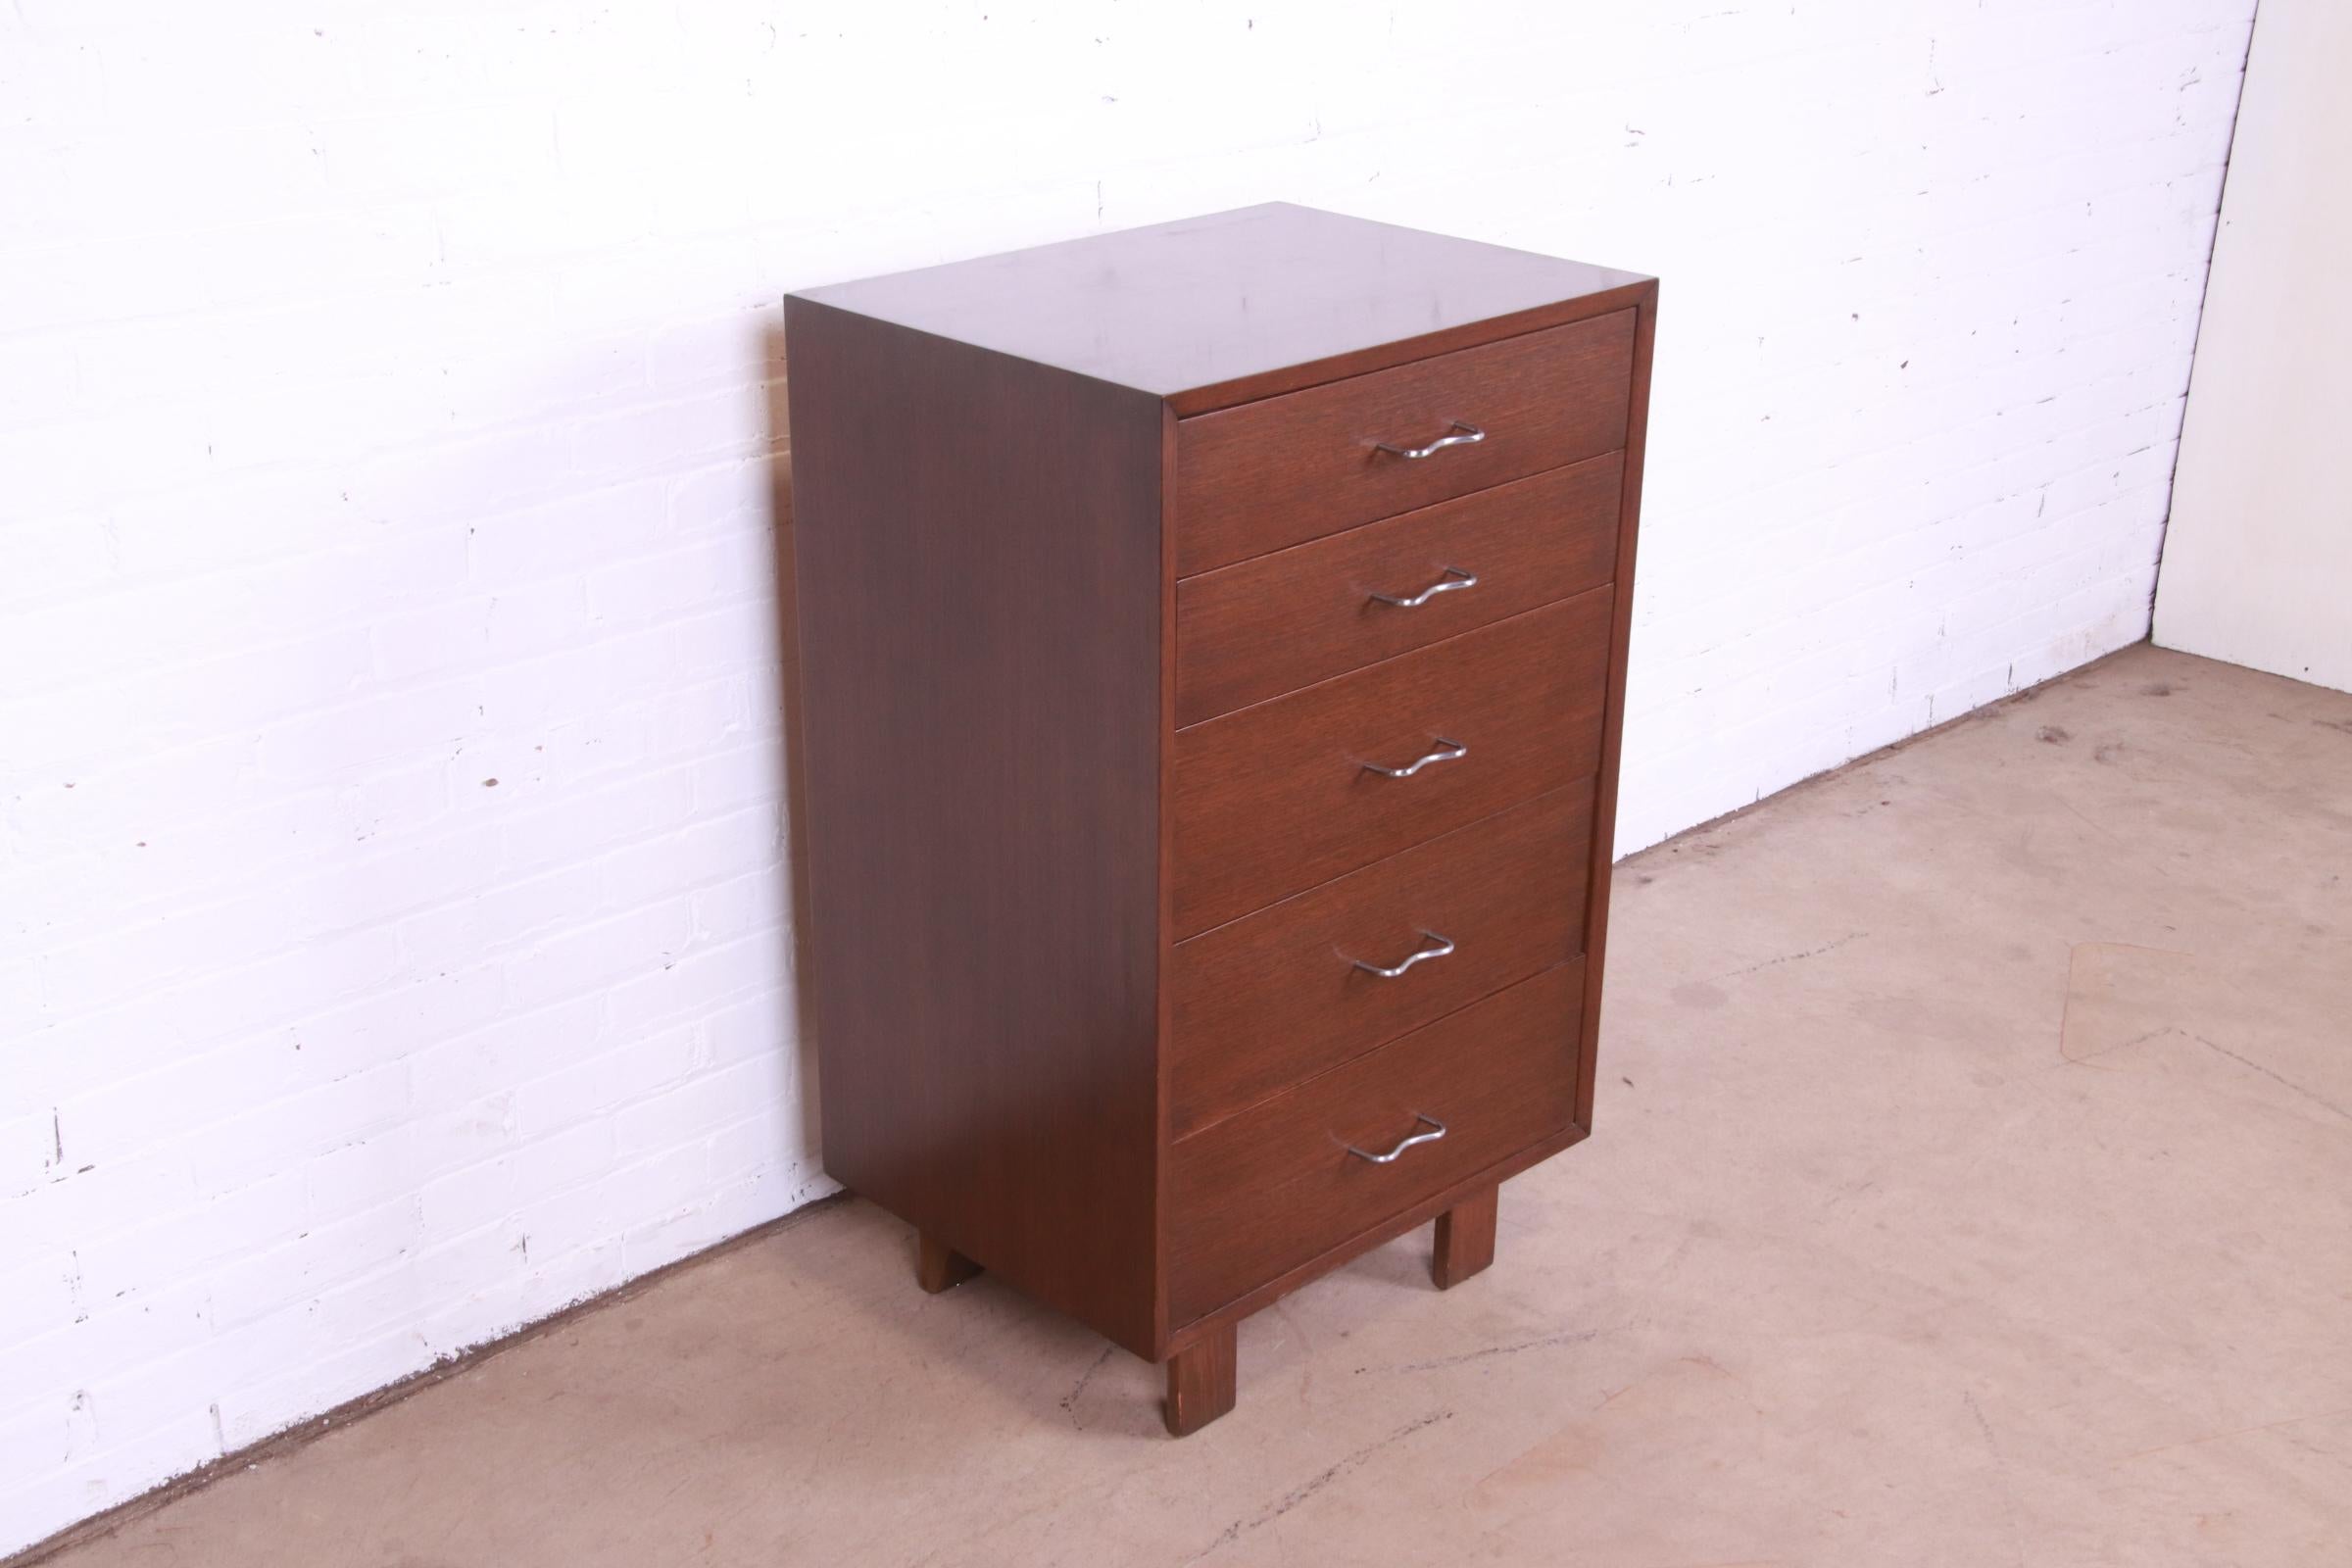 Aluminum George Nelson for Herman Miller Walnut Chest of Drawers, 1950s For Sale